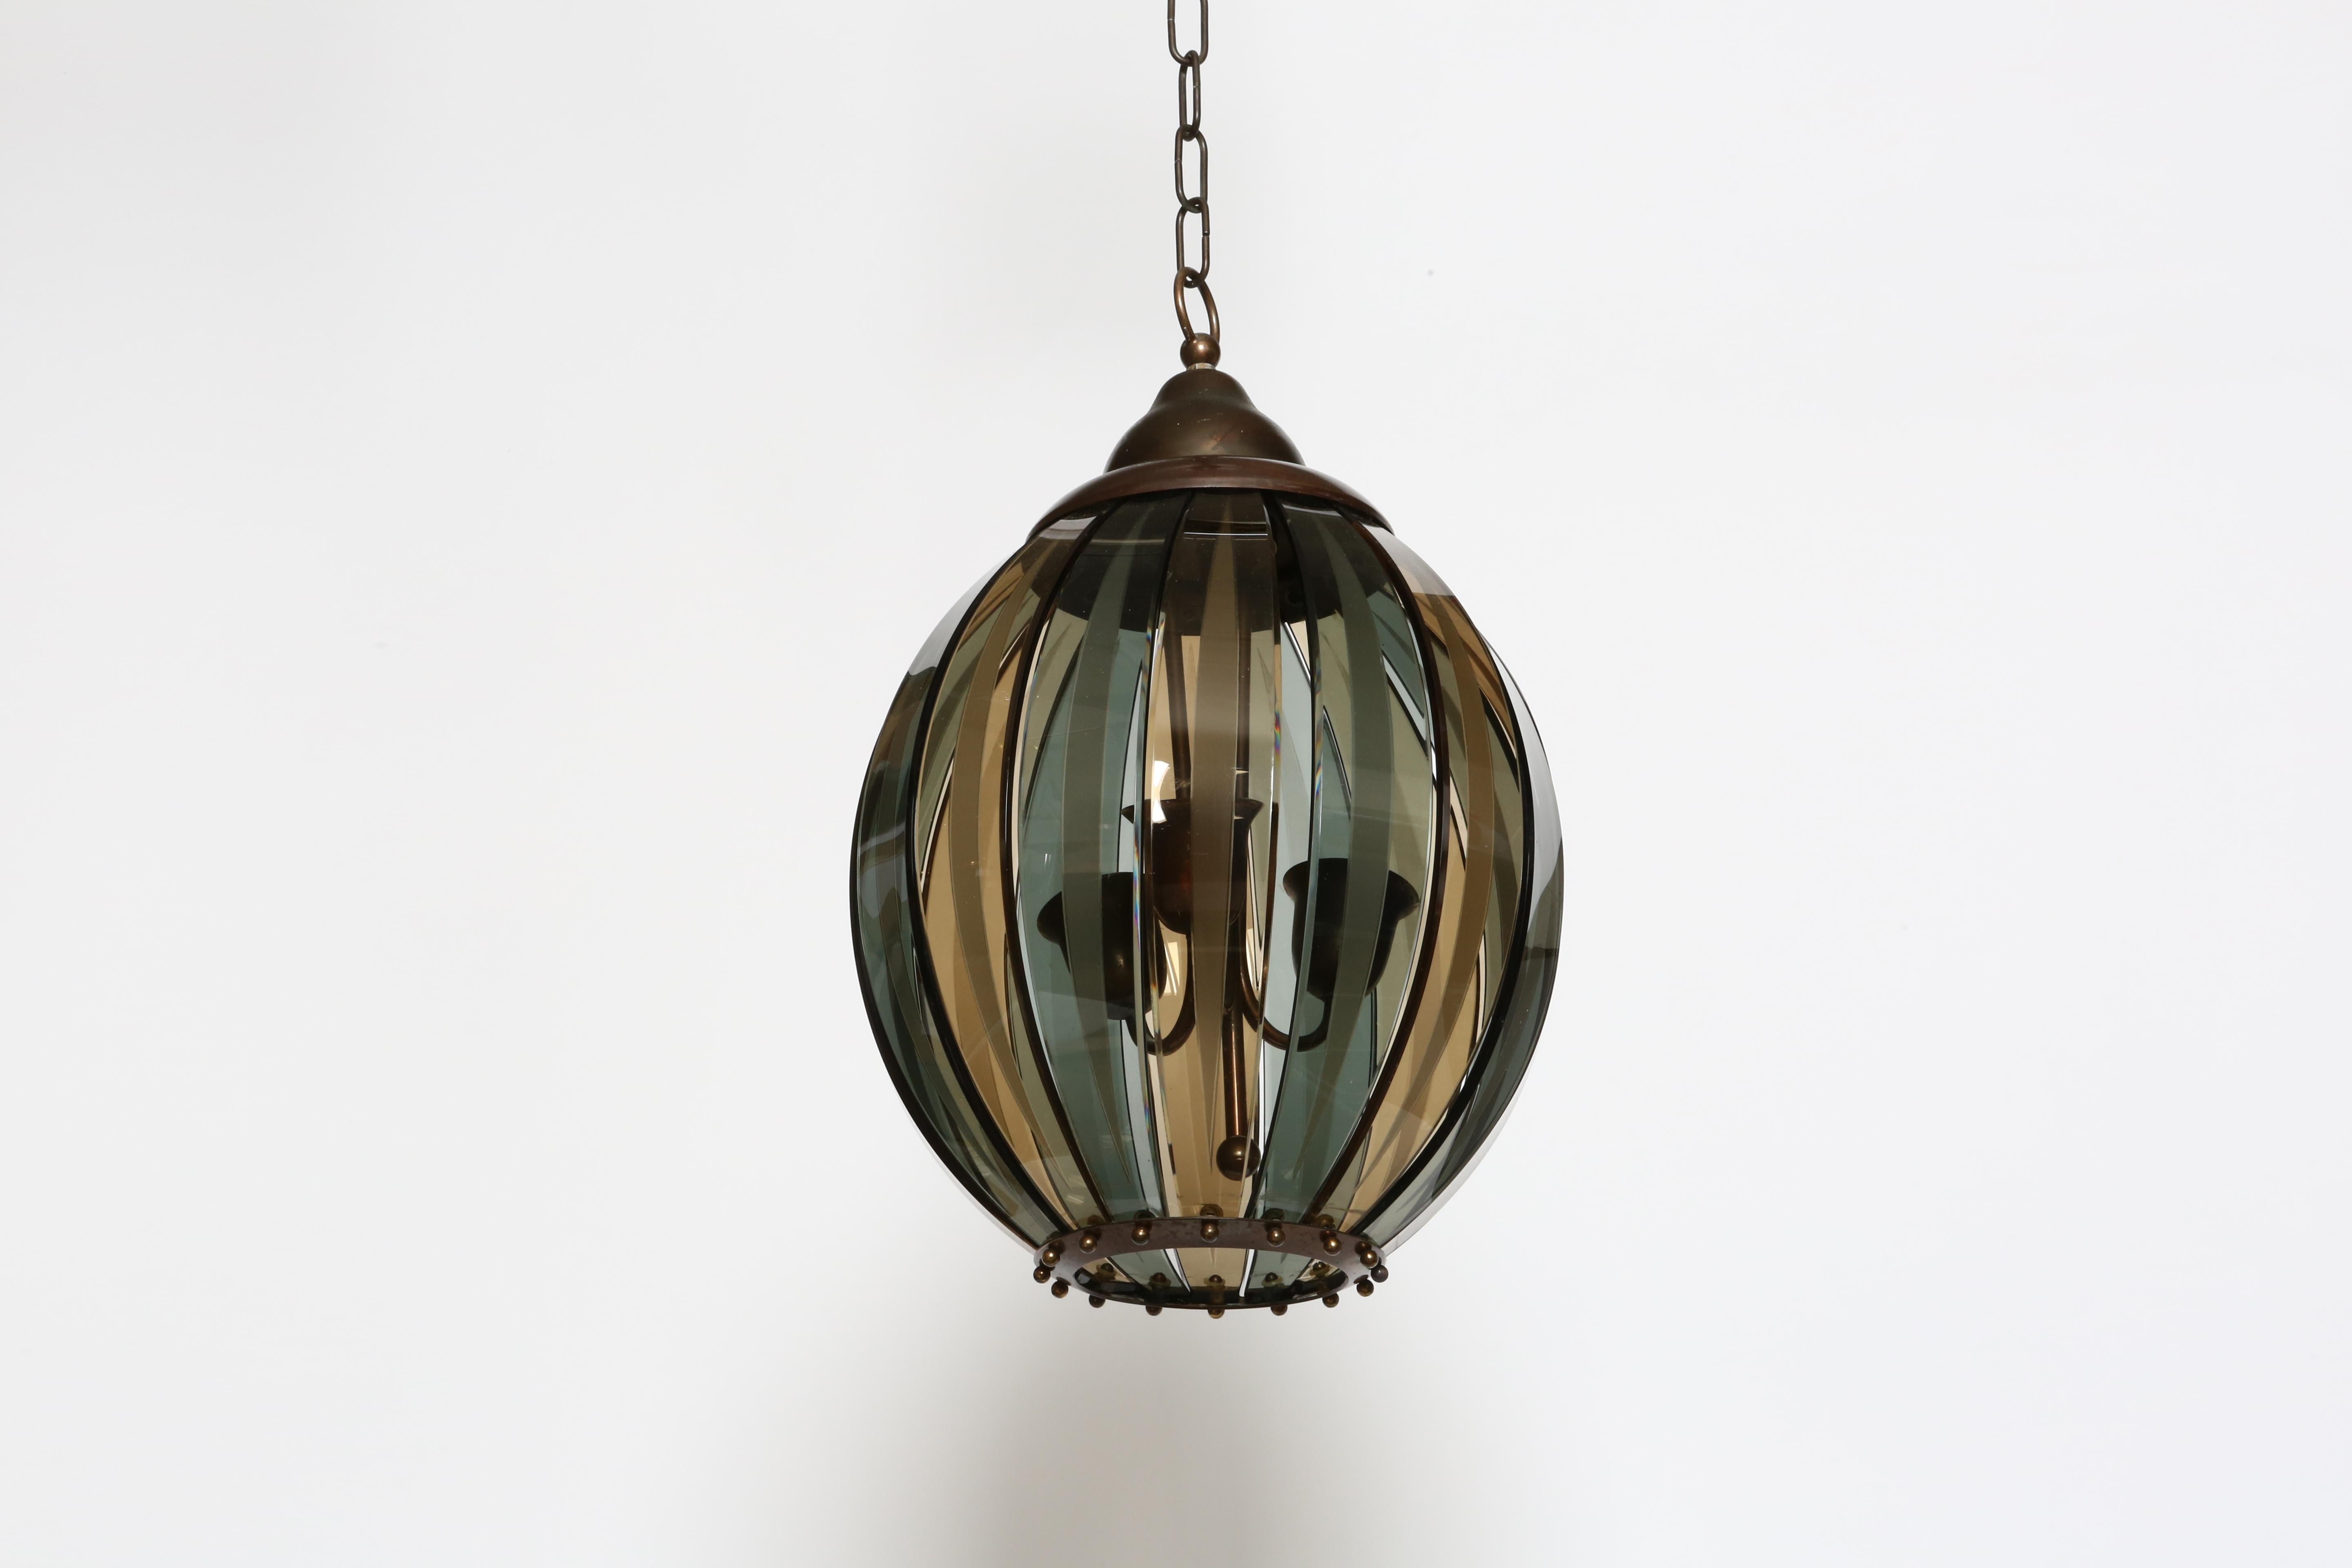 Suspension ceiling light by Stilnovo, attributed.
Designed and manufactured in Italy in 1970s
Smoked colored glass in 2 tones, patinated brass frame.
Height adjustable.
Light's body is 20.5 inches.
Three candelabra sockets.
Complimentary US rewiring